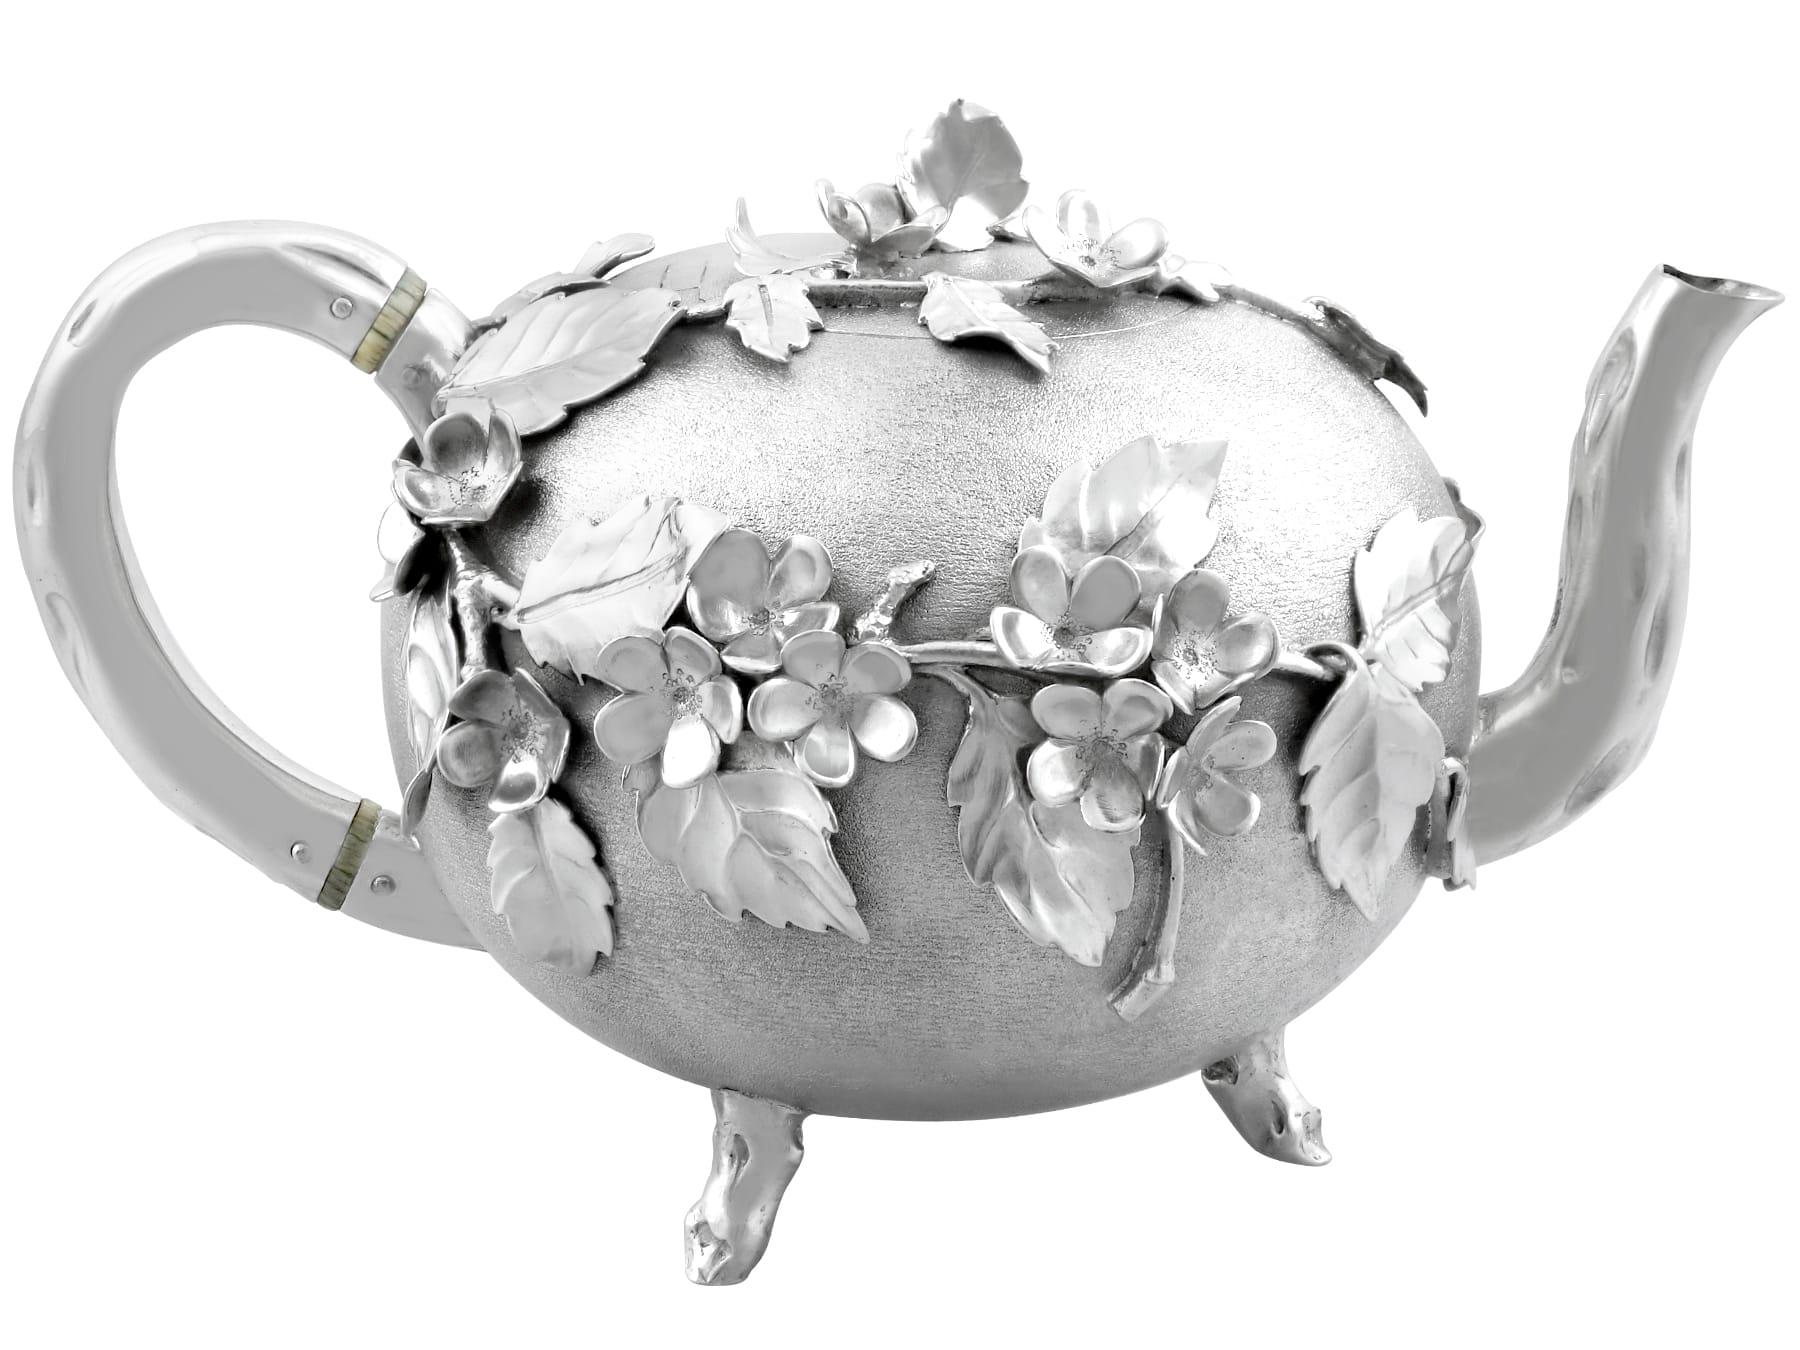 British 1800s Antique William IV Sterling Silver Teapot by Charles Fox II 